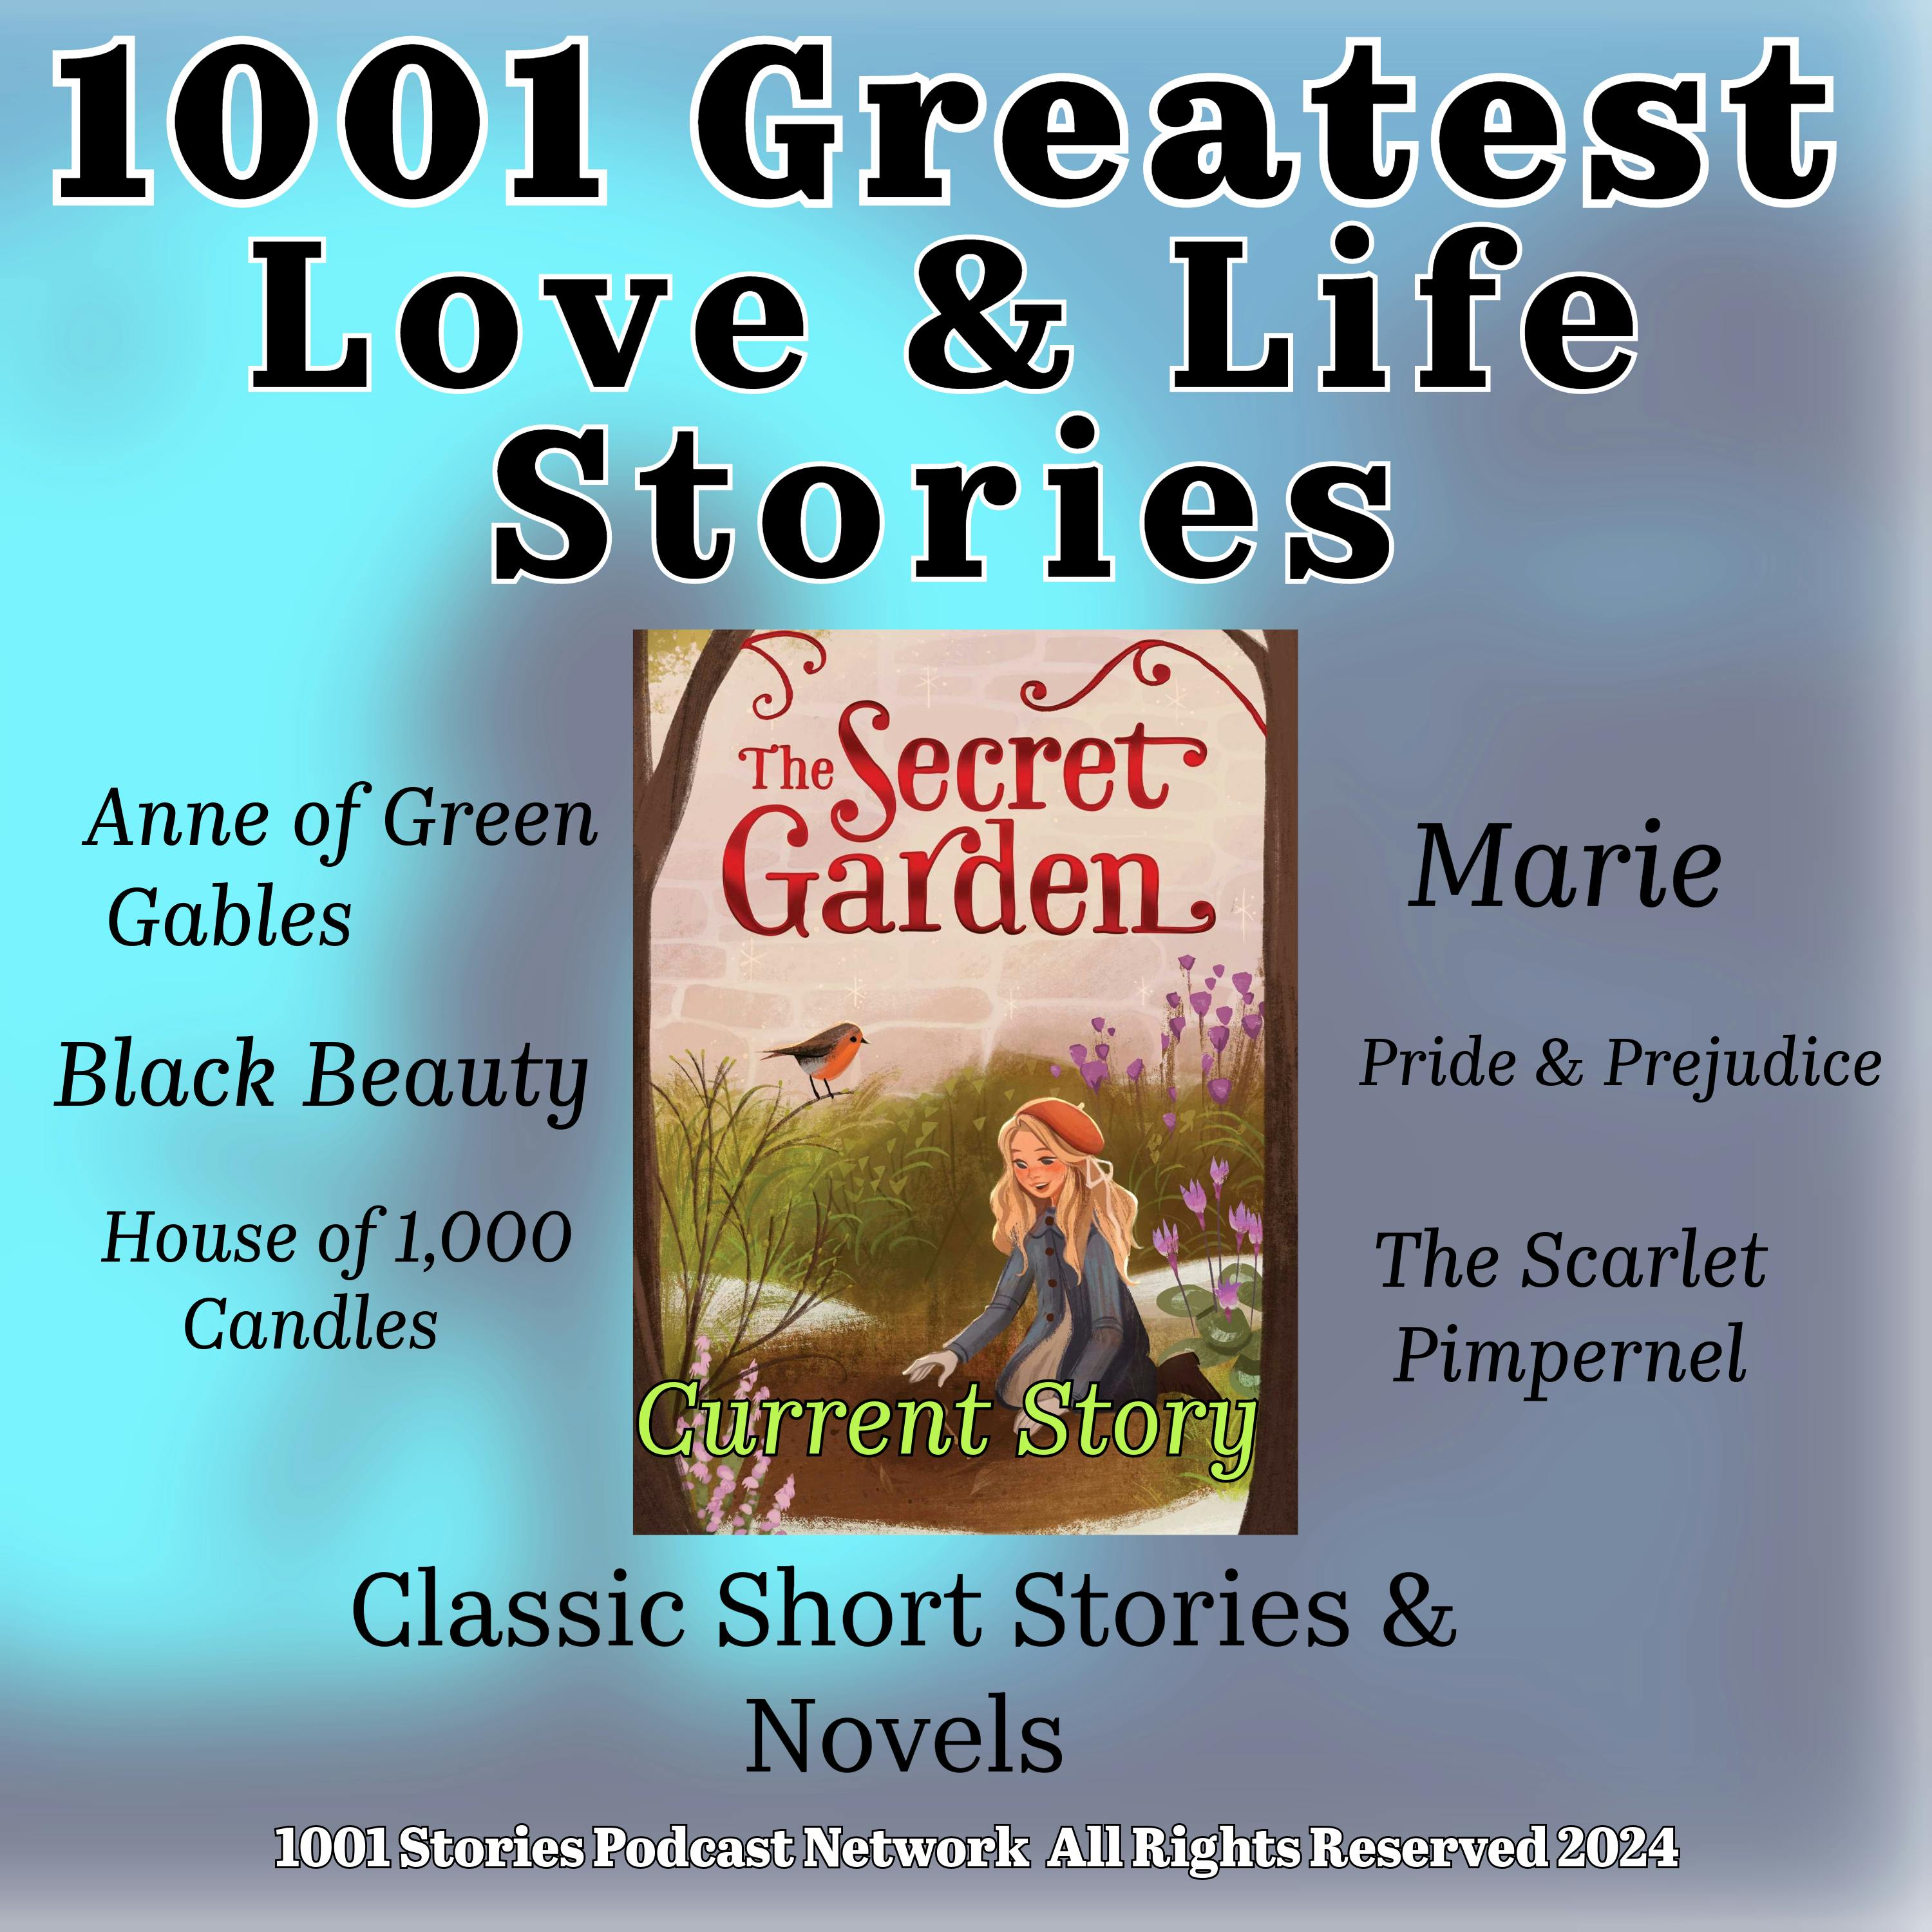 1001 Greatest Love & Life Stories